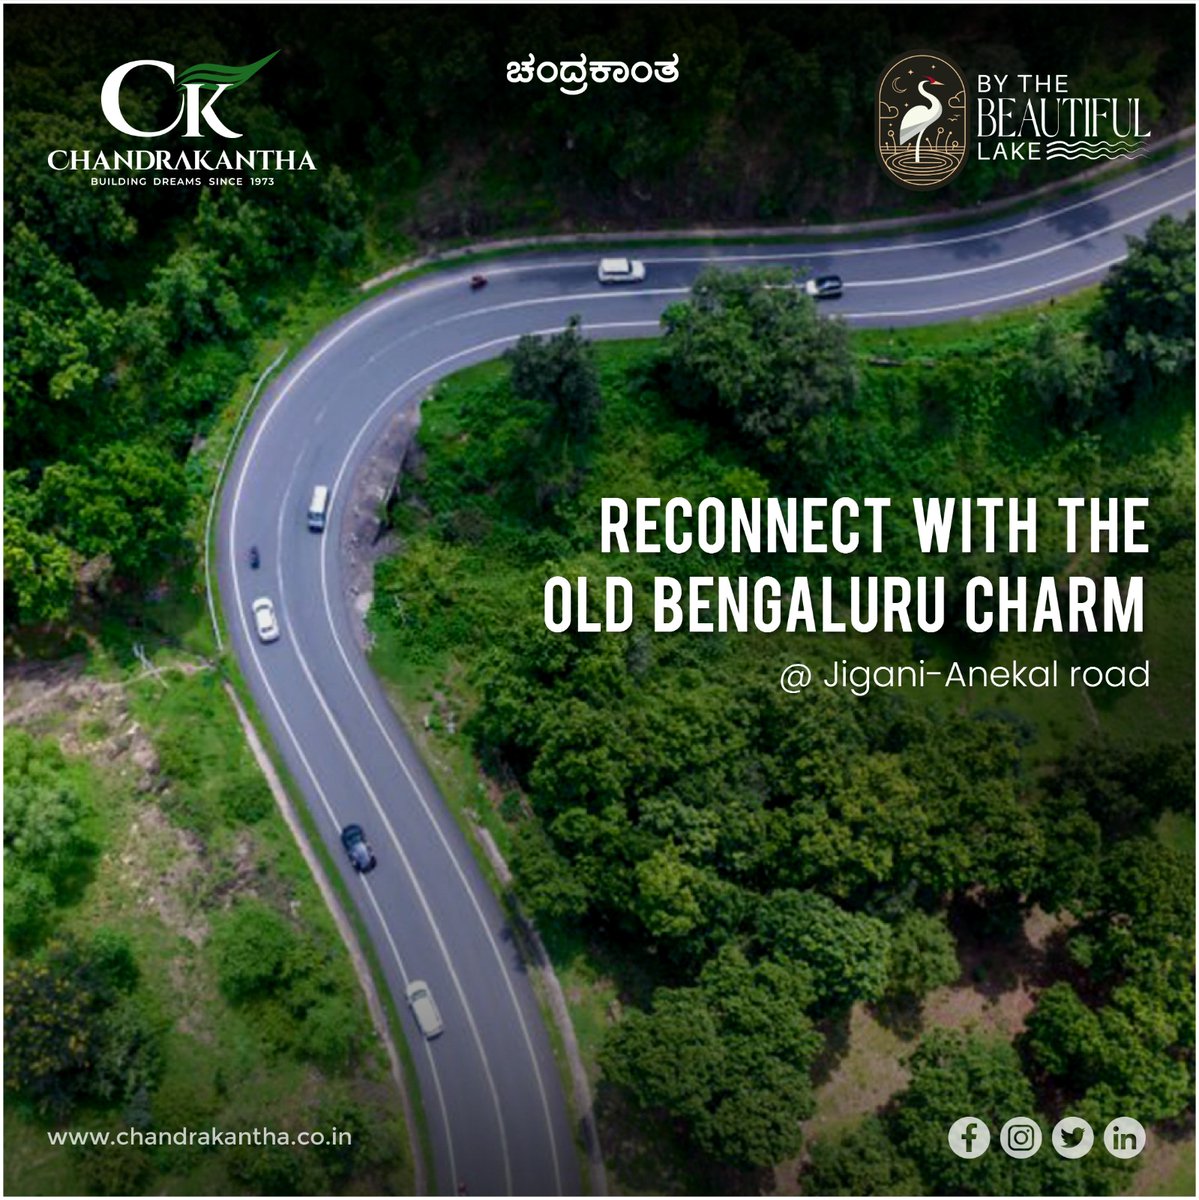 Don't just own a villa, own a villa that lets you relive the old Bengaluru charm. Contact us to know more about our latest project.
#bythebeautifullake #chandrakanthadevelopers #2bhkvillas #3bhkvillas #lakefrontvillas #lakeview #lakefronthouse #luxuryhomes #house #homesweethome